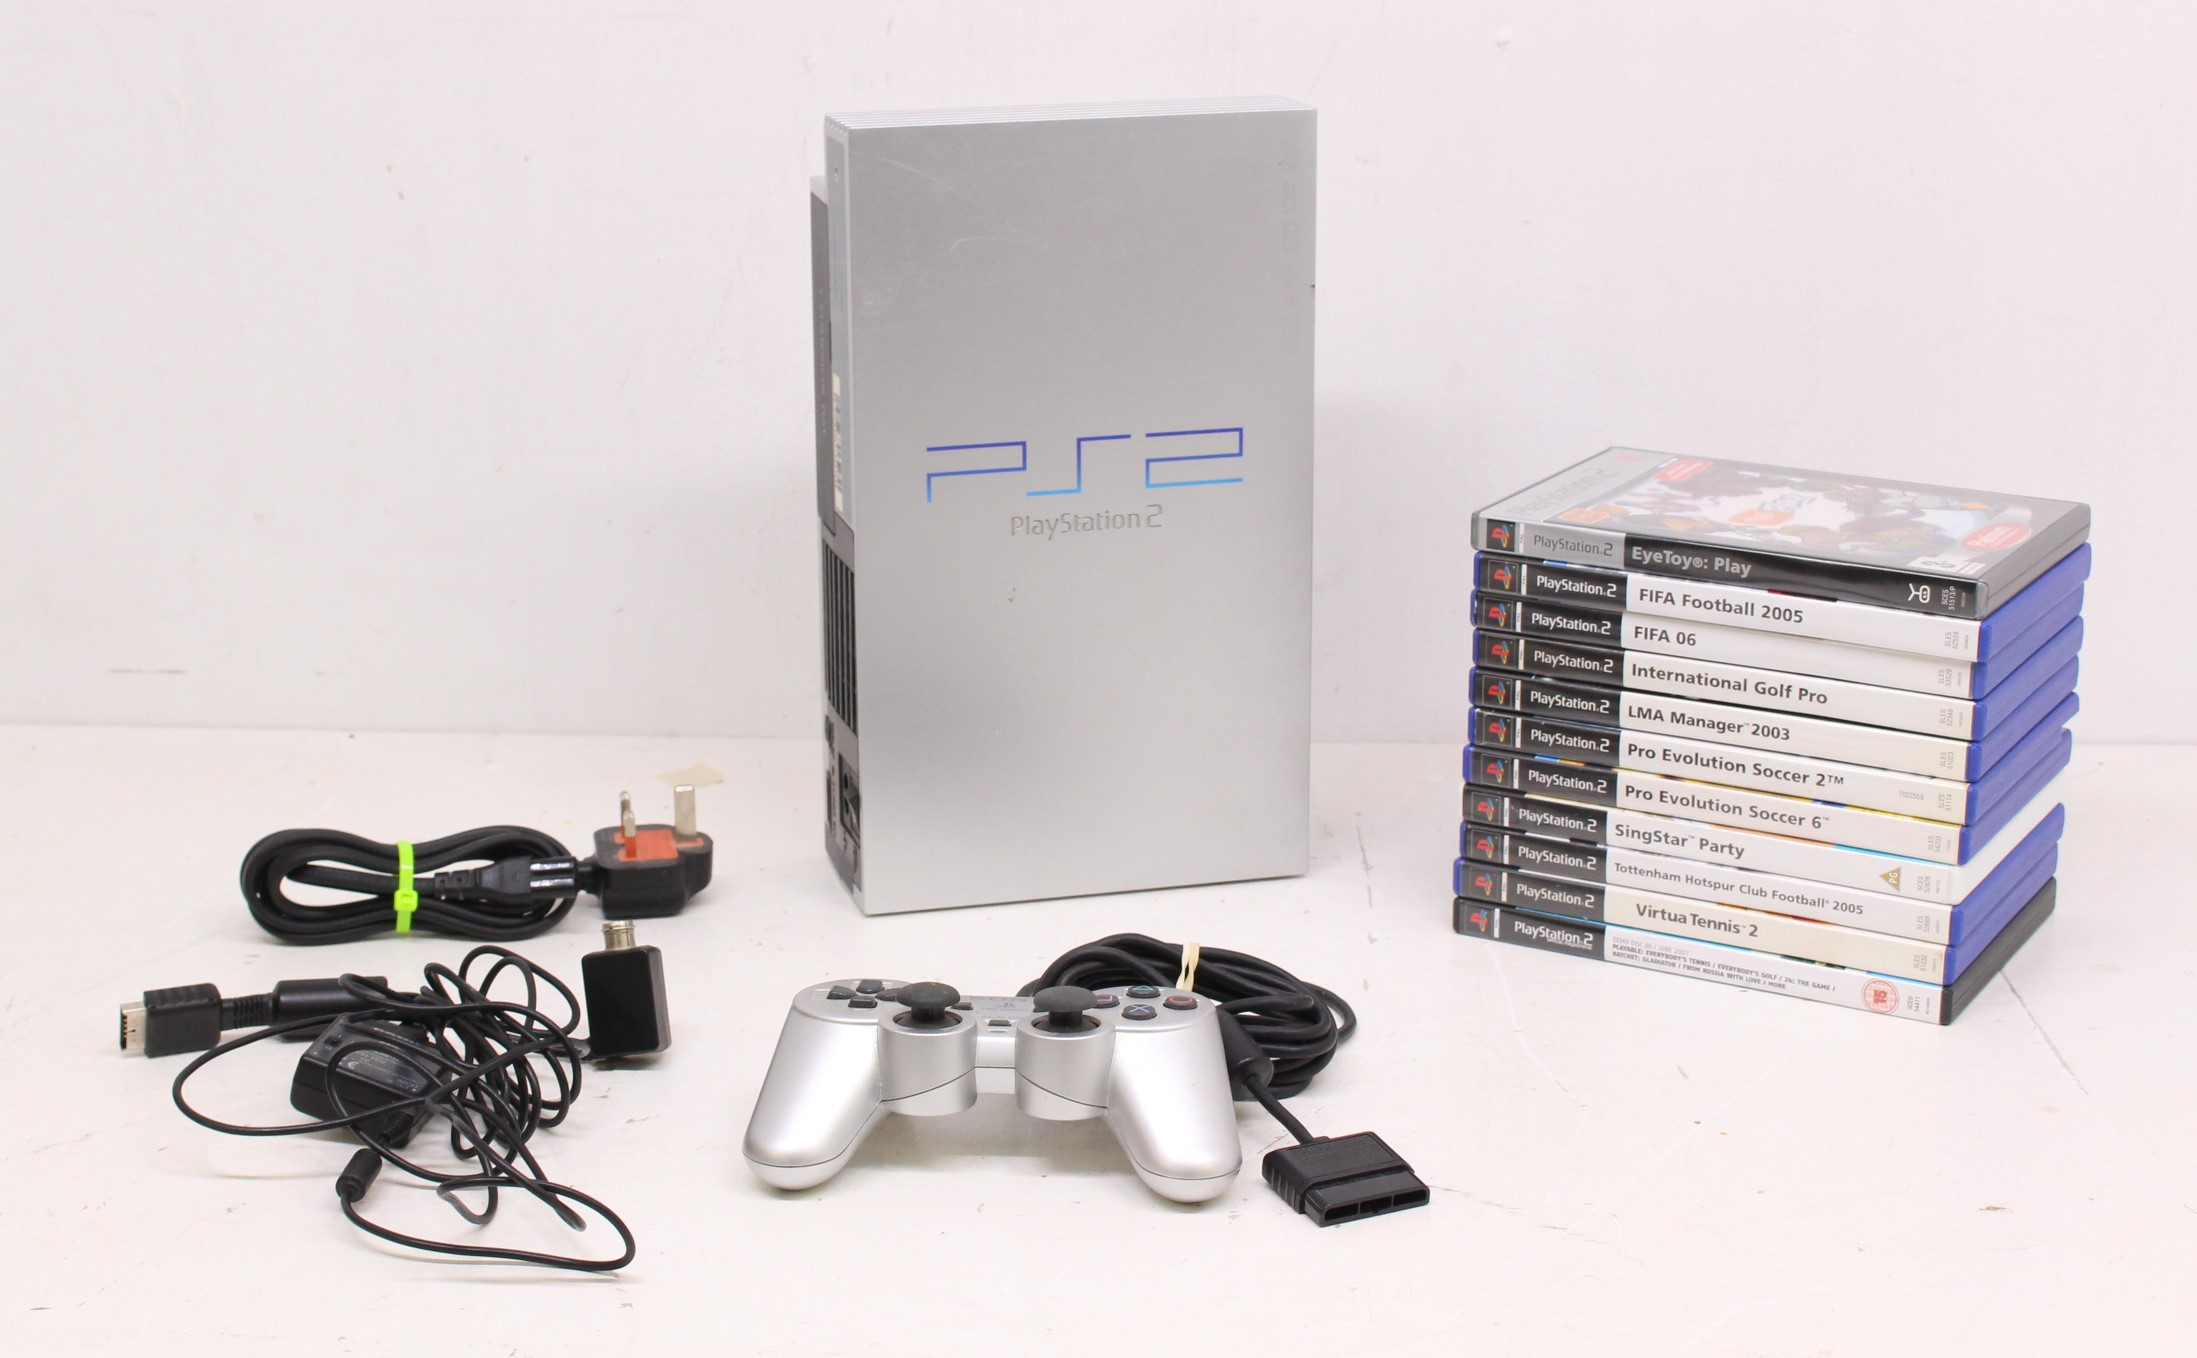 Playstation: An unboxed Sony Playstation 2 console; together with a collection of games,